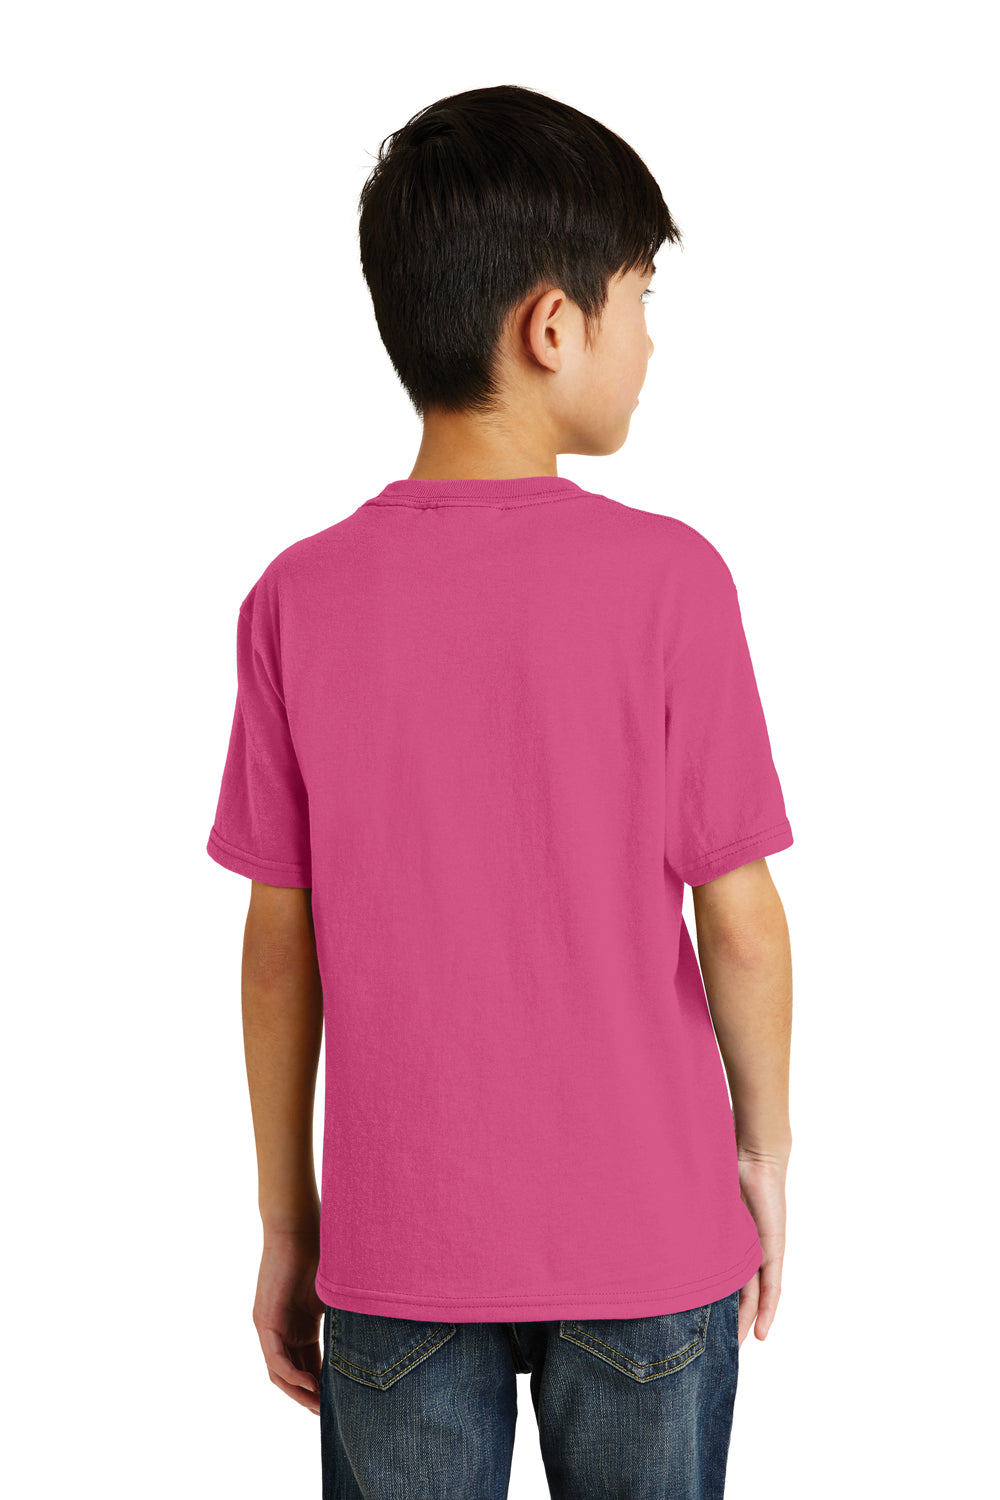 Port & Company PC55Y Youth Core Short Sleeve Crewneck T-Shirt Sangria Pink Back